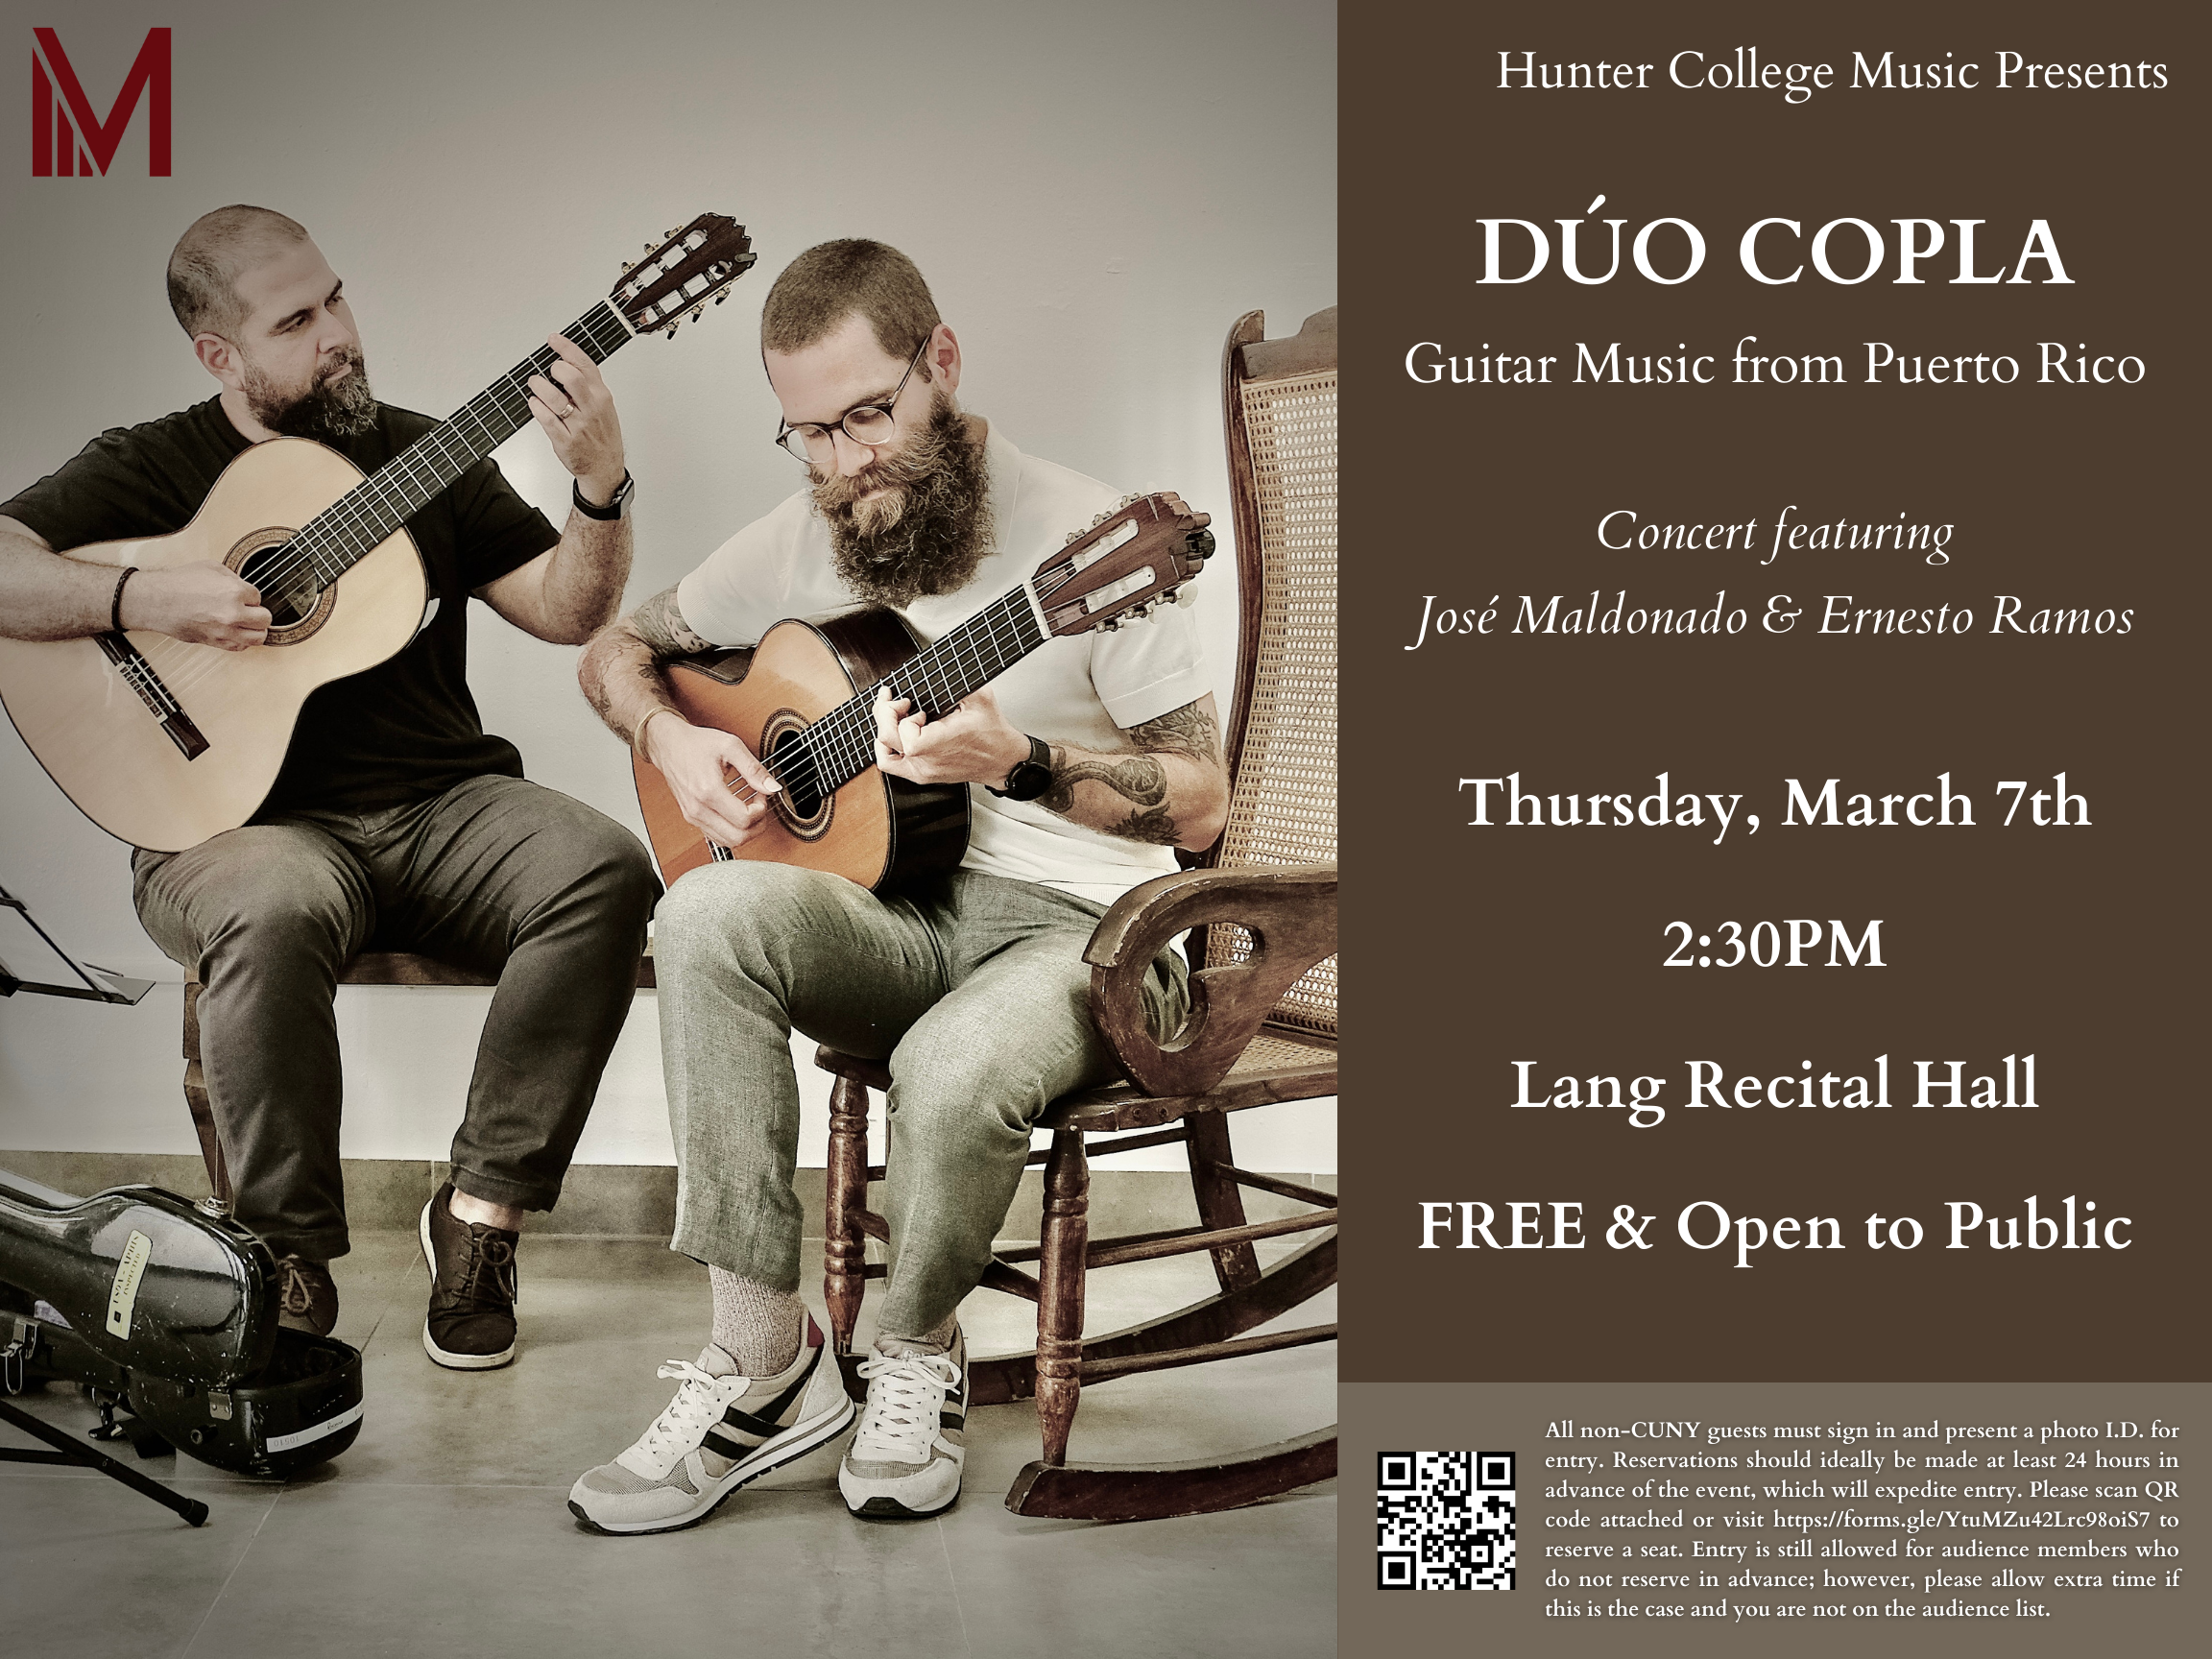 Dúo Copla: Guitar Music from Puerto Rico at Hunter College